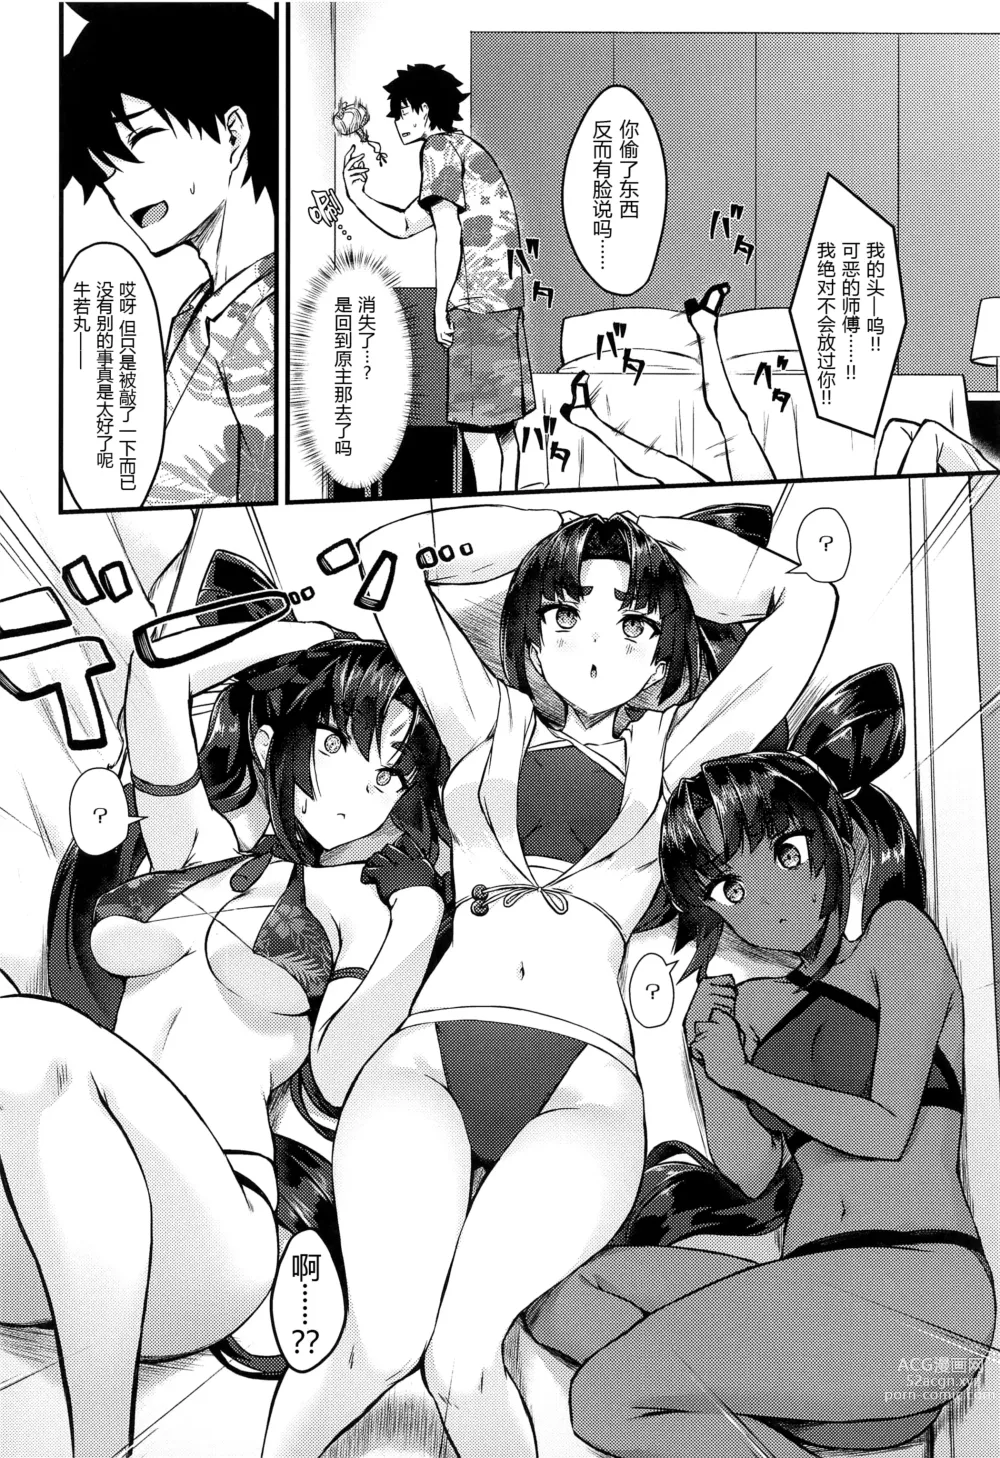 Page 4 of doujinshi Comparing the Ushis